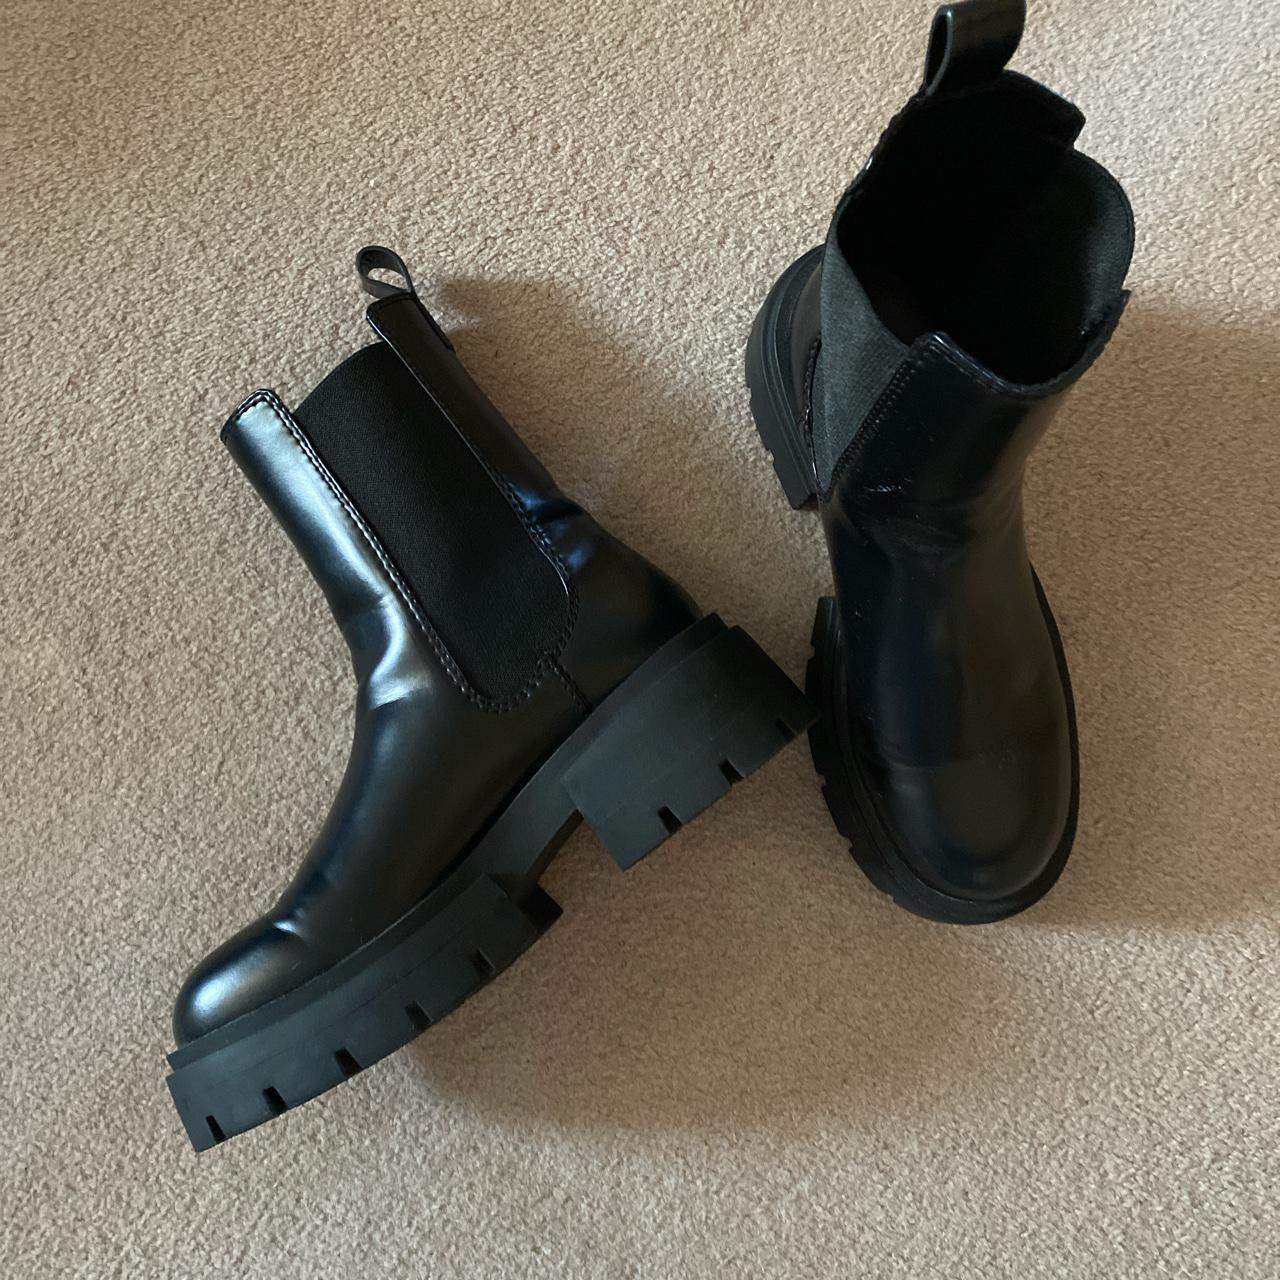 Product Image 2 - H&M chunky ankle boots. Worn